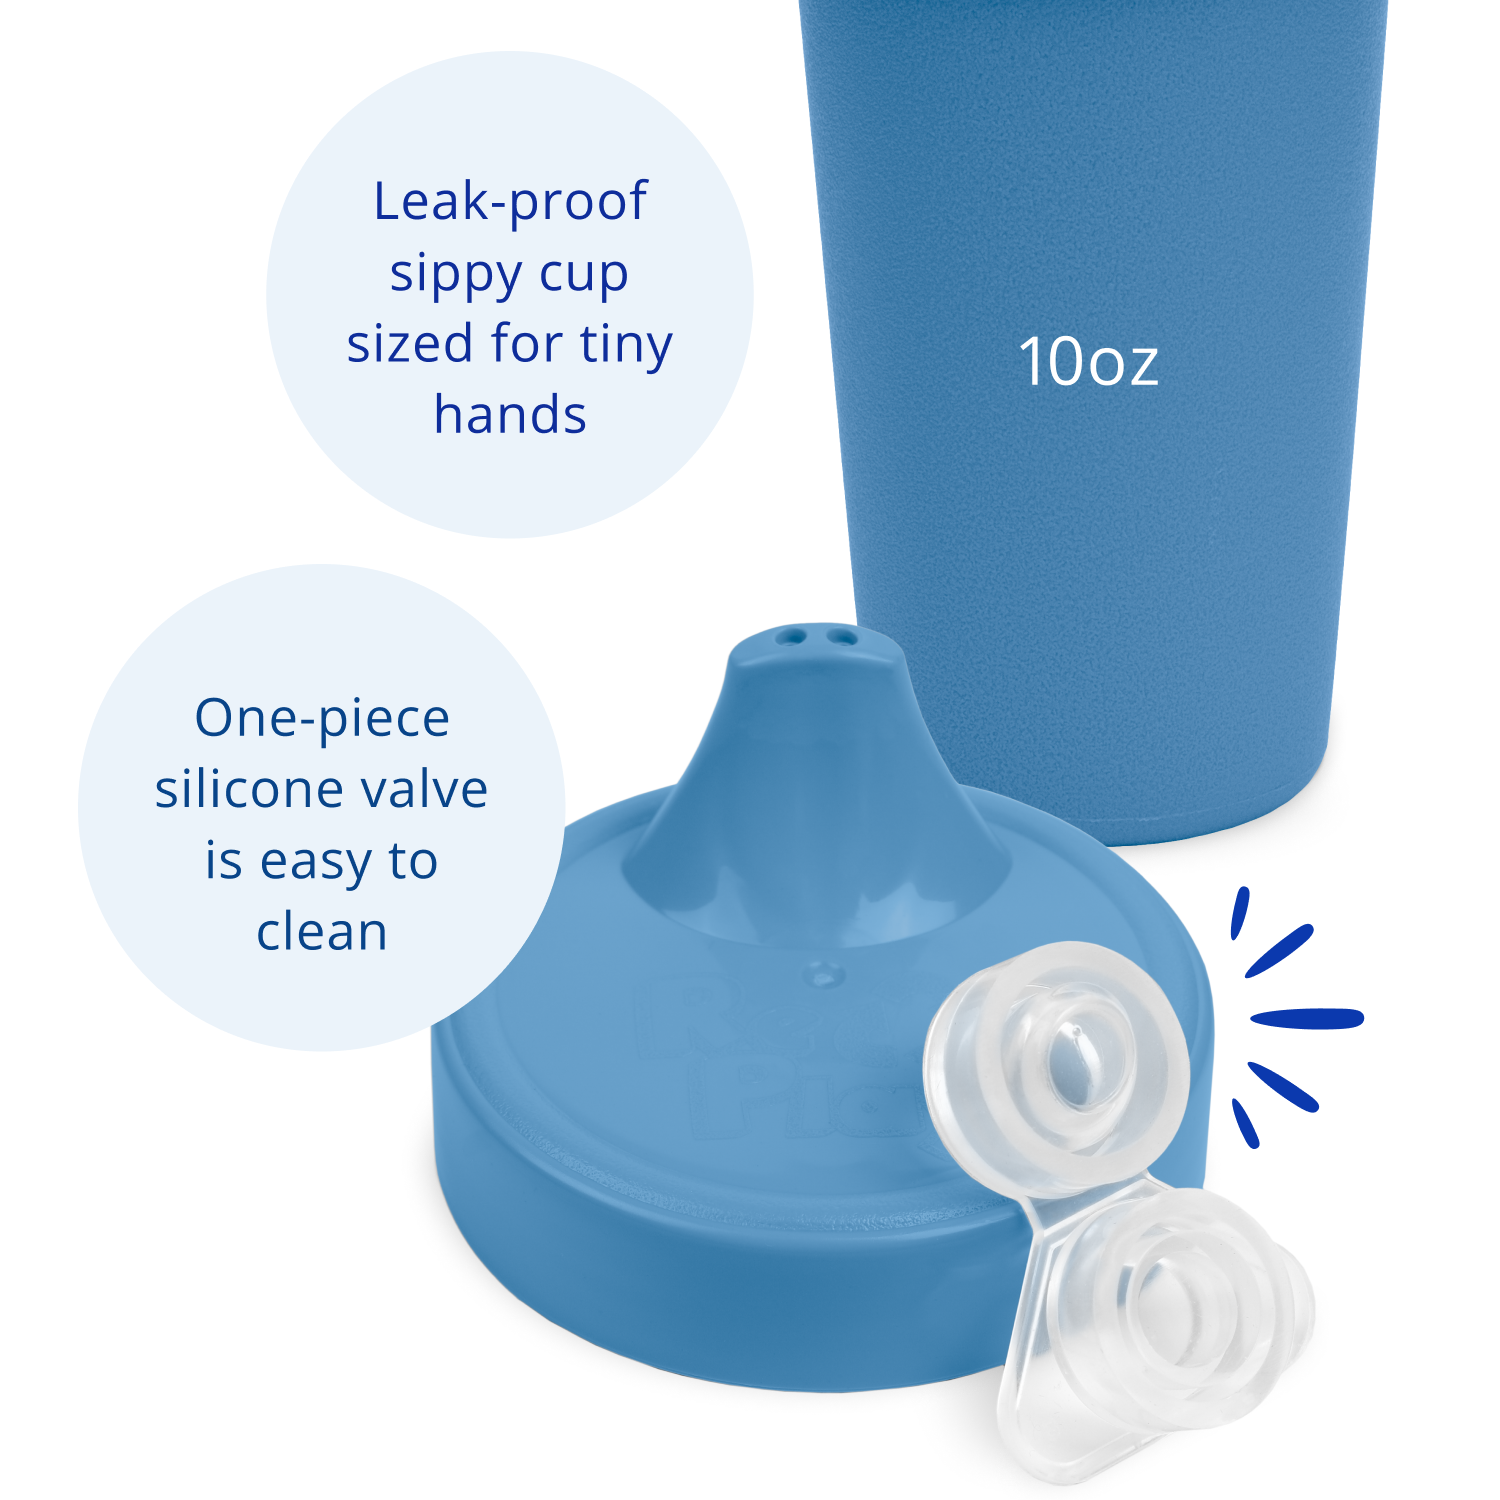 Re-Play Made in USA 10 Oz. Sippy Cups for Toddlers, Set of 3 - Reusable  Spill Proof Cups for Kids, D…See more Re-Play Made in USA 10 Oz. Sippy Cups